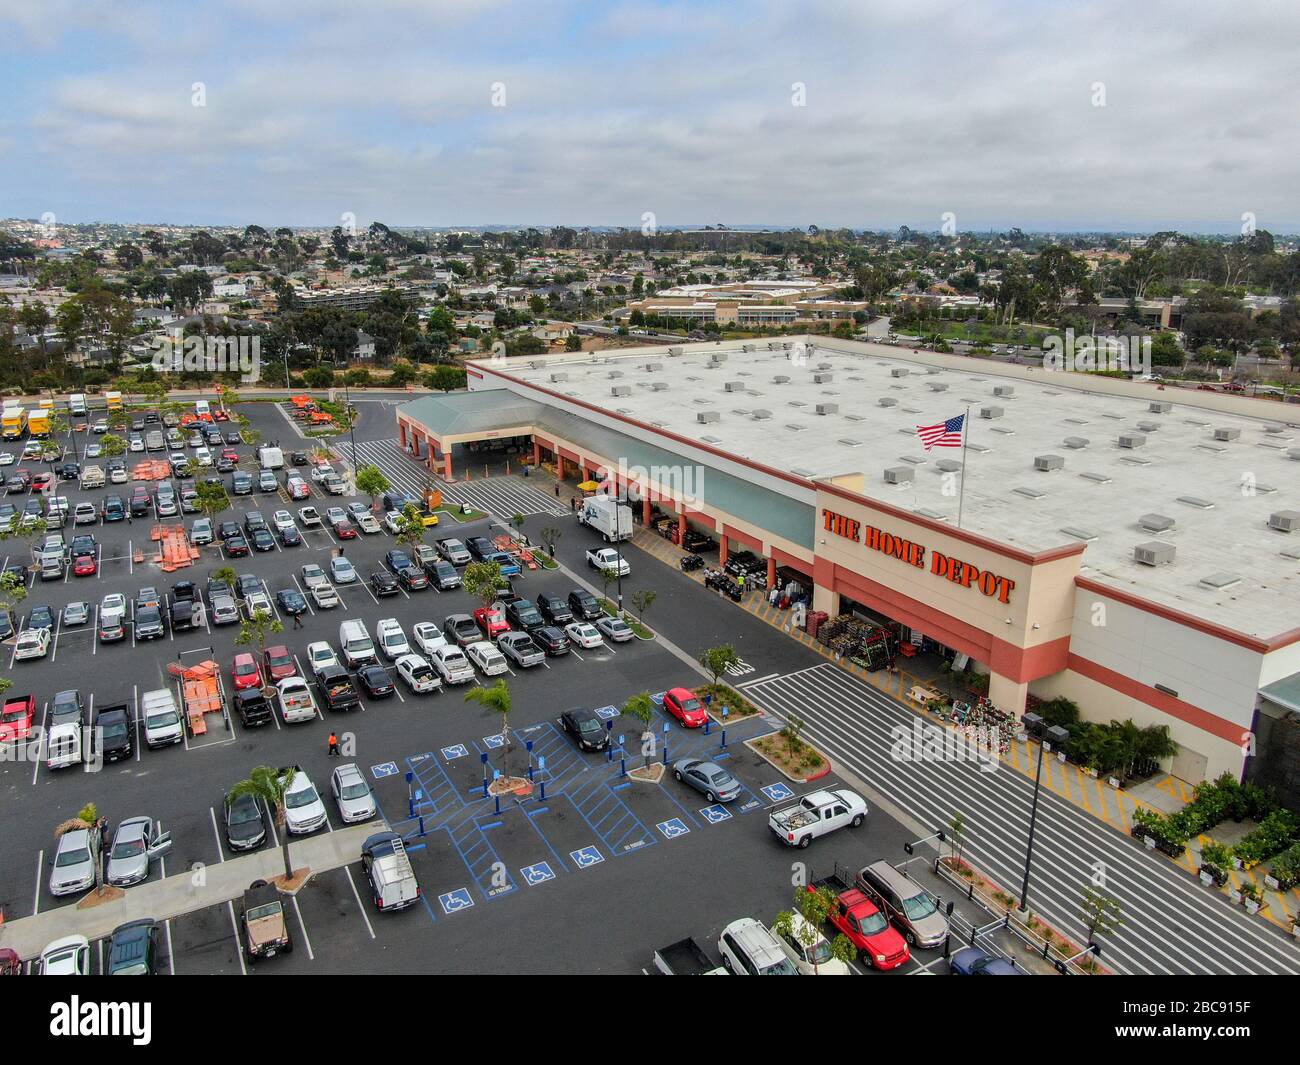 Aerial view of The Home Depot store and parking lot in San Diego